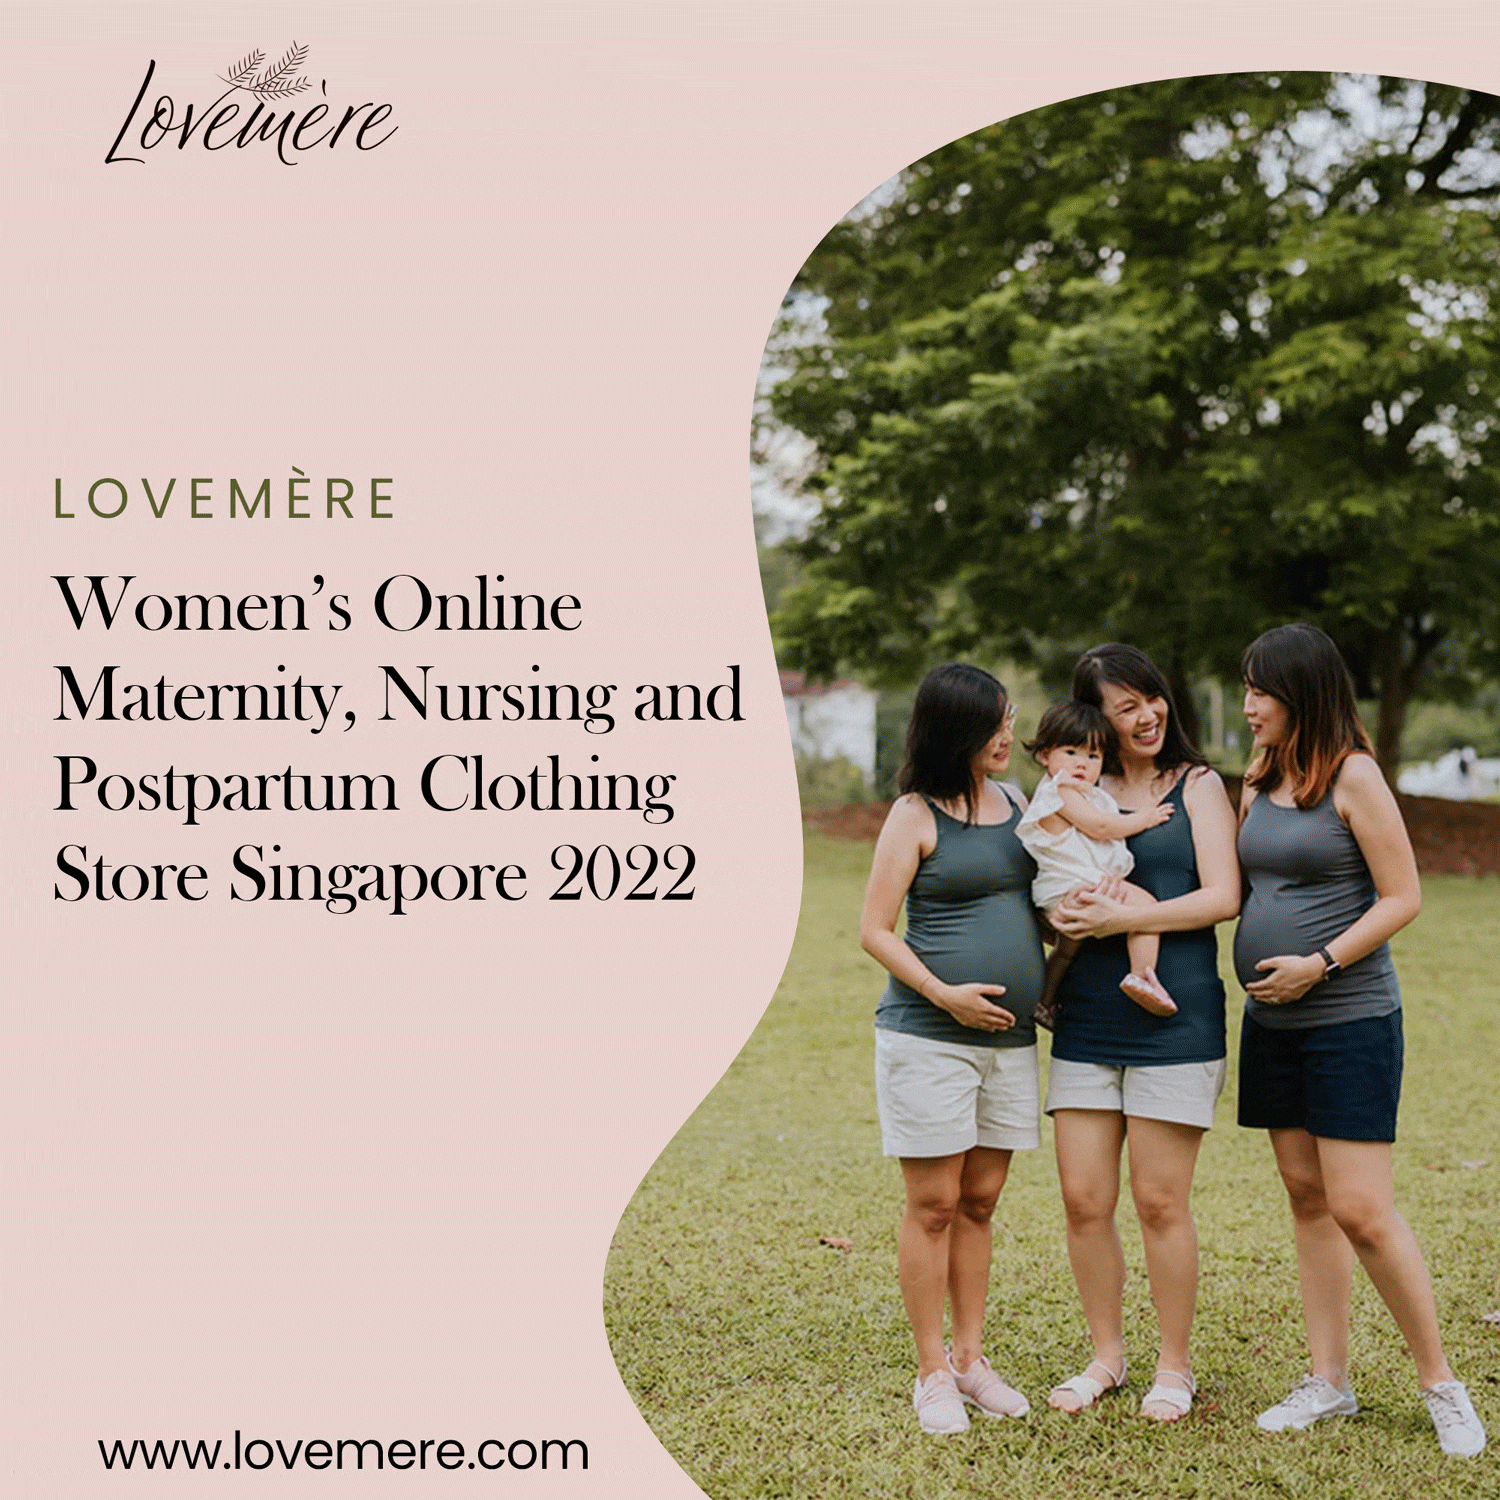 Women’s Online Maternity and Postpartum Clothing Store Singapore 2022